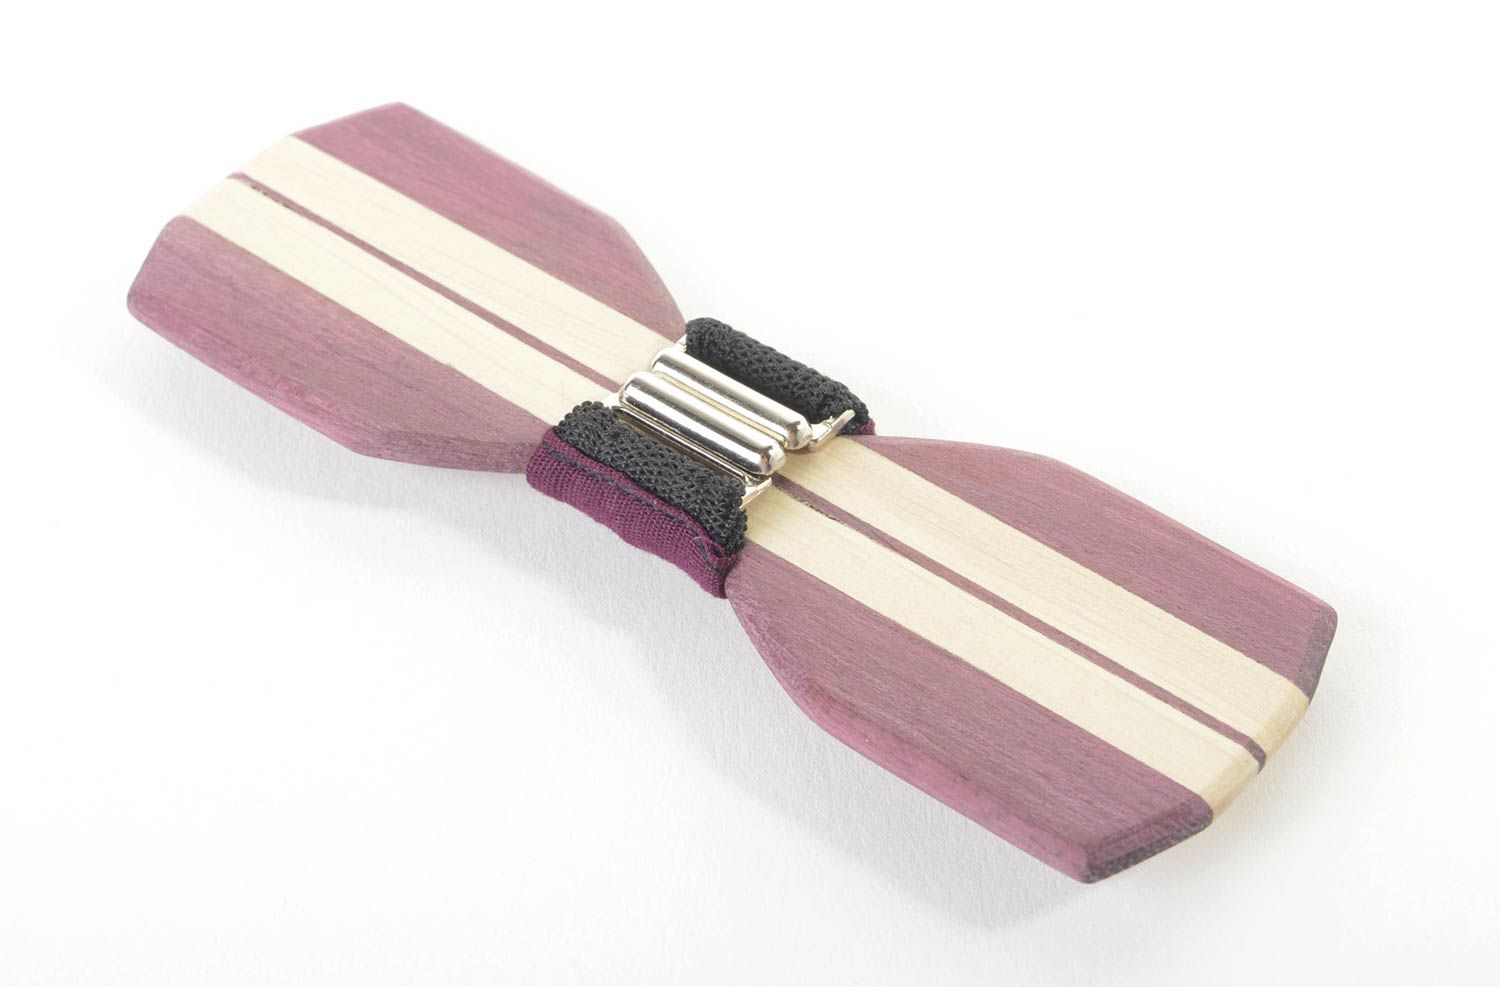 Handmade wooden bow ties stylish bow ties for men nice present for friend photo 3